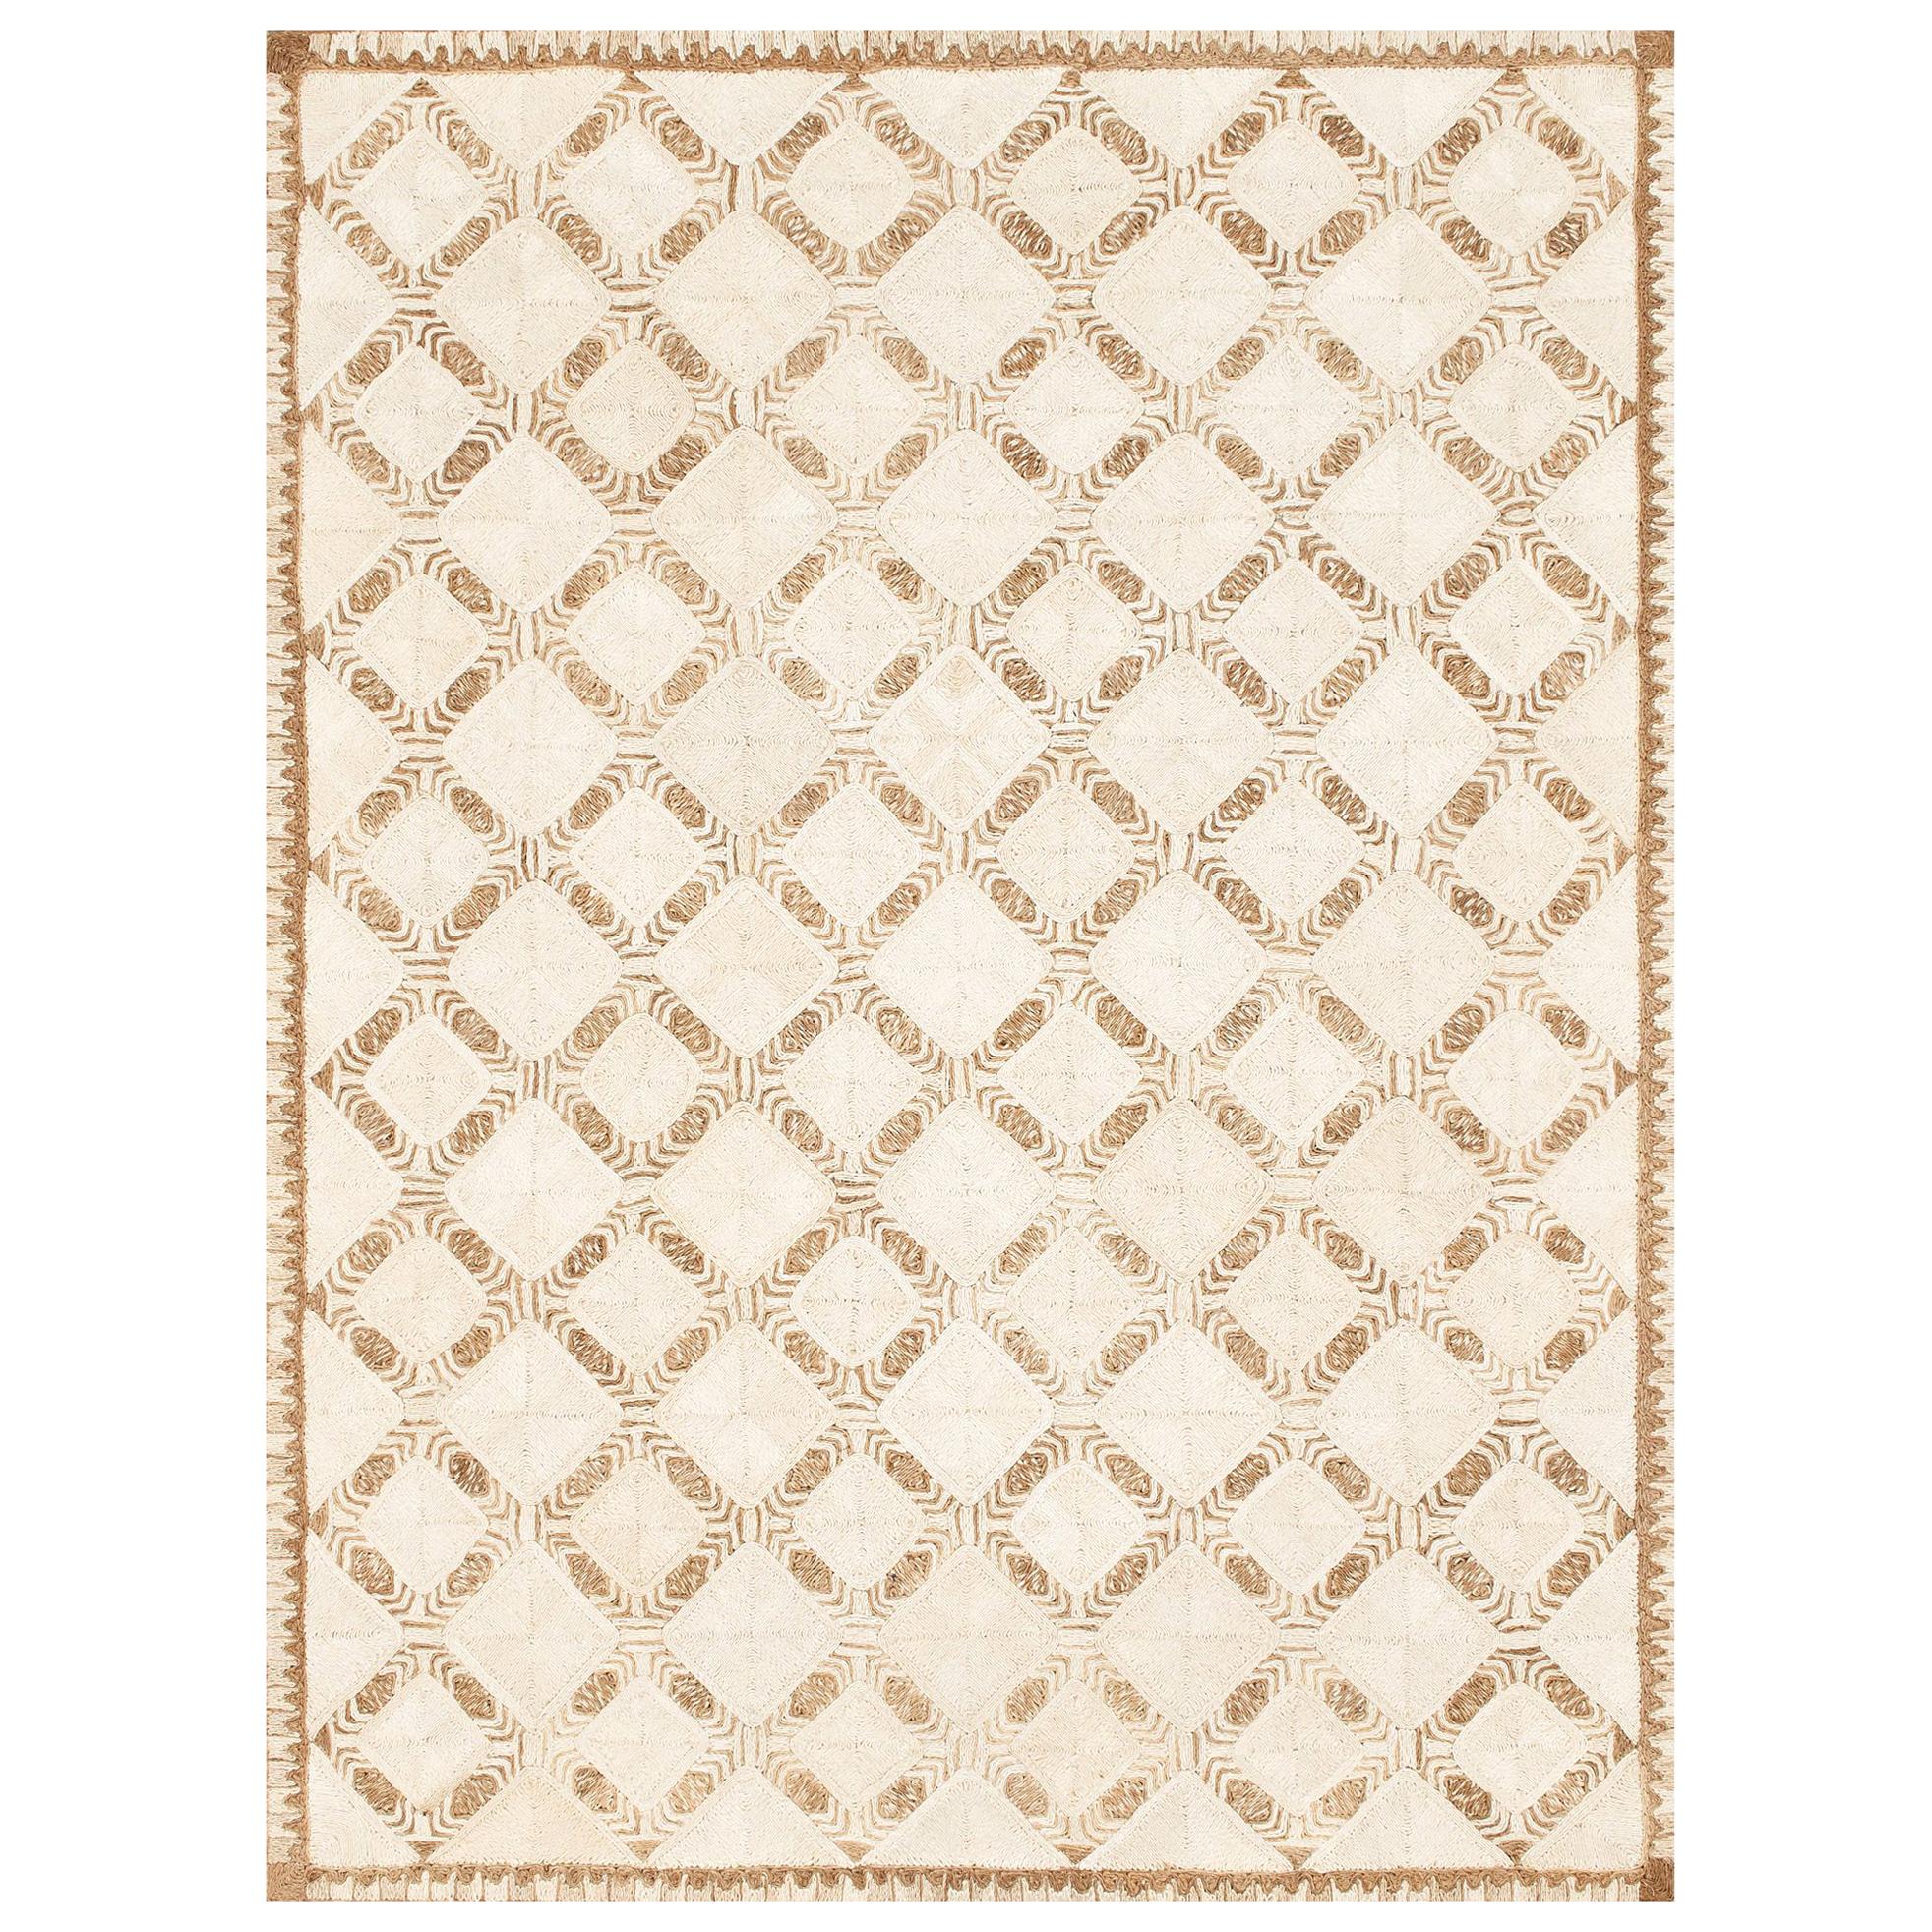 Schumacher Amare Area Rug in Handwoven Abaca by Patterson Flynn Martin